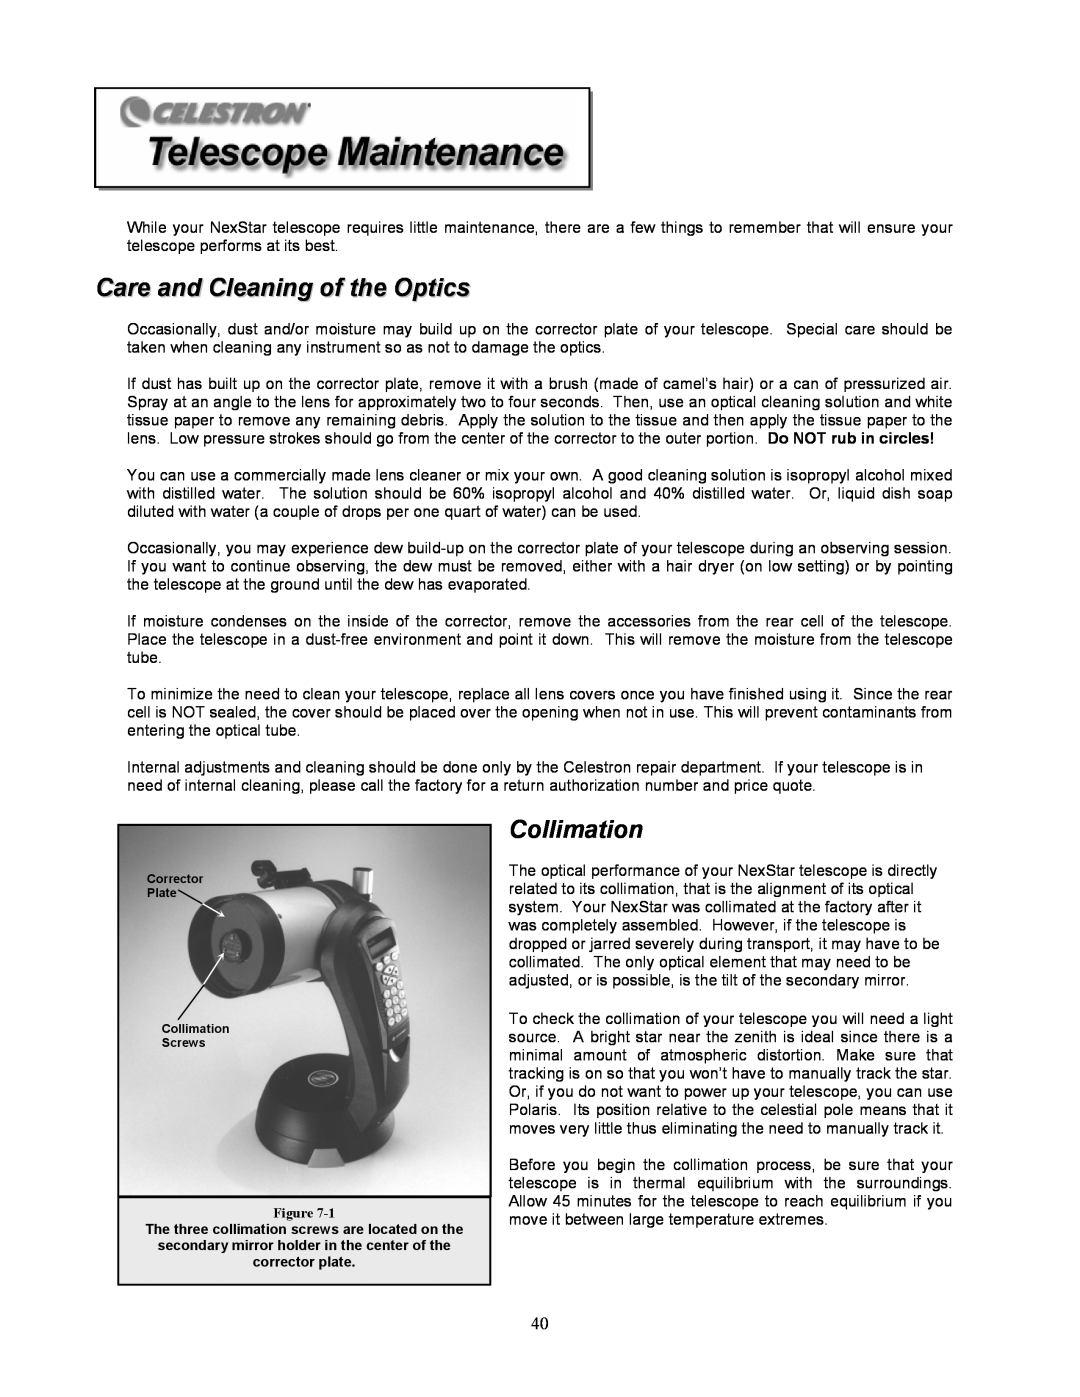 Celestron 8i manual Care and Cleaning of the Optics, Corrector Plate Collimation Screws 